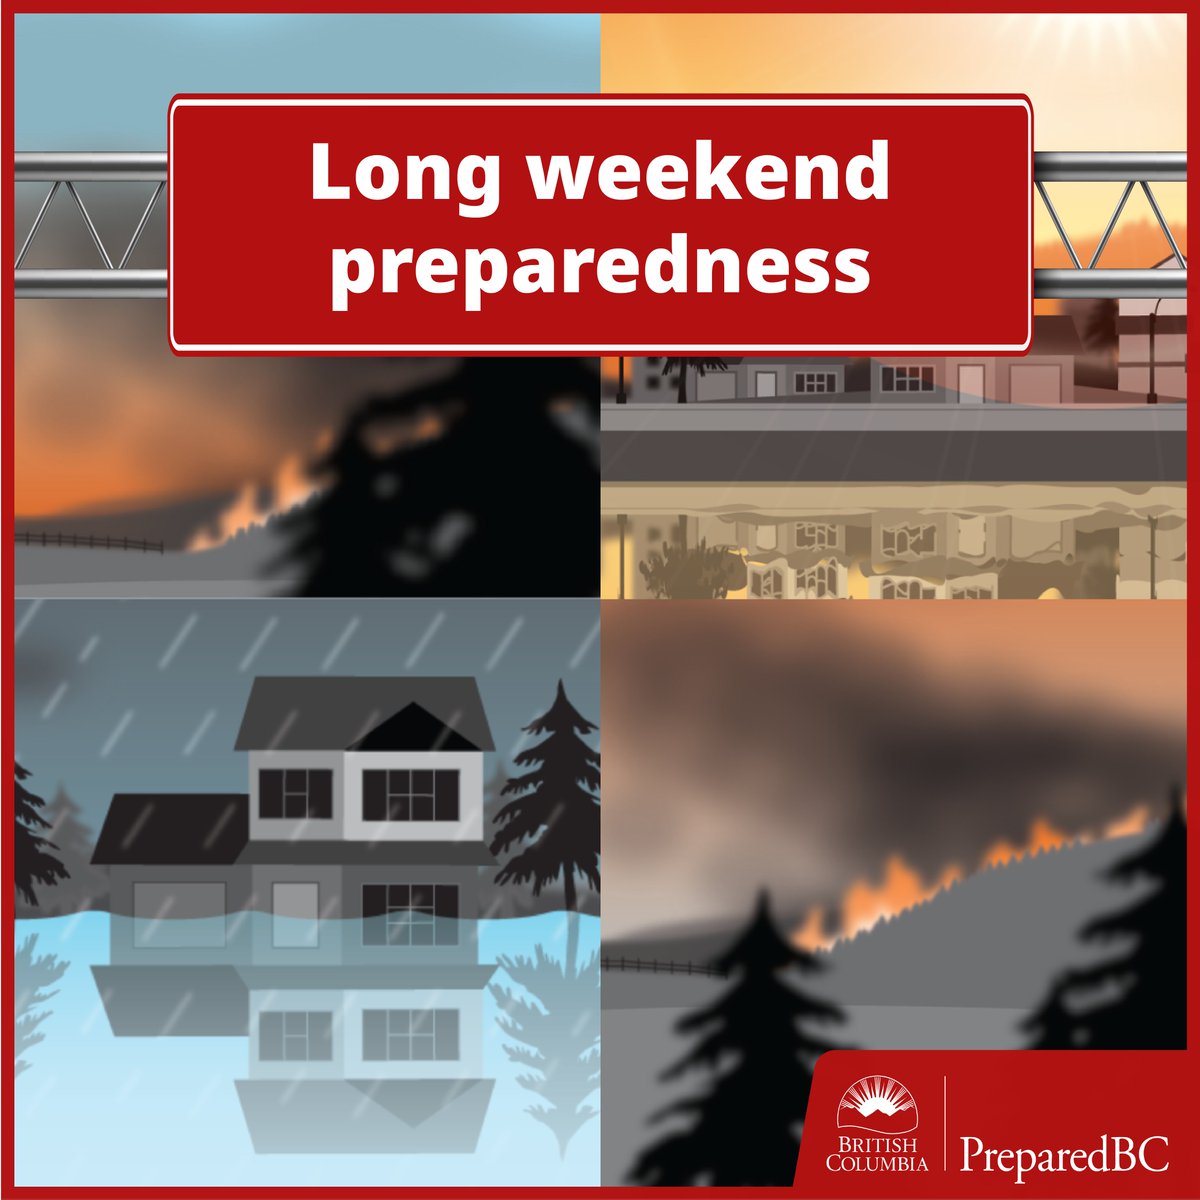 Whether you’re staying home or hitting the road this Victoria Day long weekend, be prepared for: Heat: PreparedBC.ca/ExtremeHeat ☀️ Smoky conditions: ow.ly/wXcU50Oswao 🔥 Fire bans & restrictions: www2.gov.bc.ca/gov/content/sa… ❗